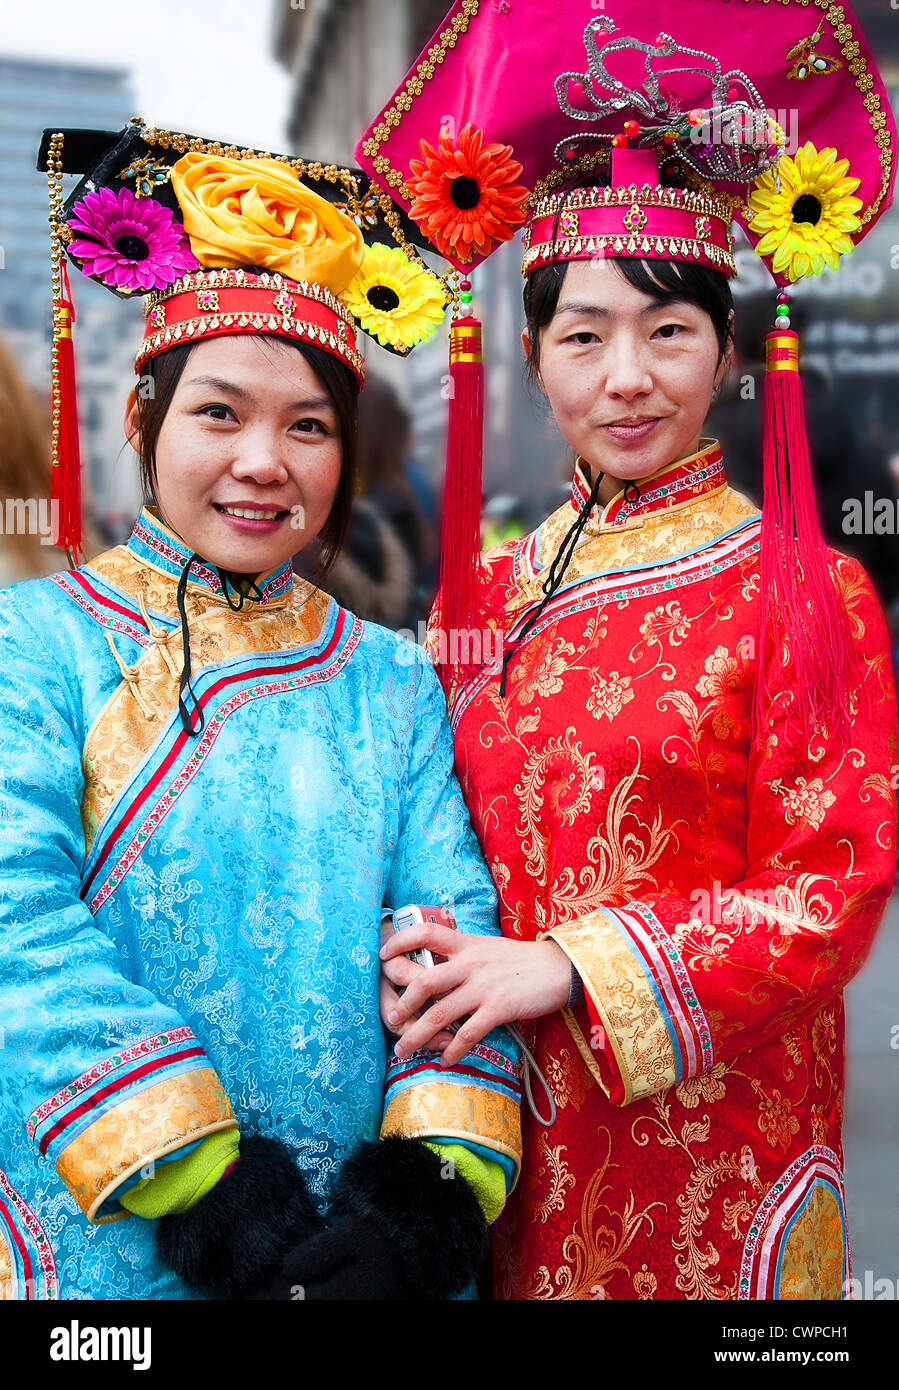 UK. England. London. Two Chinese women in traditional costume during ...